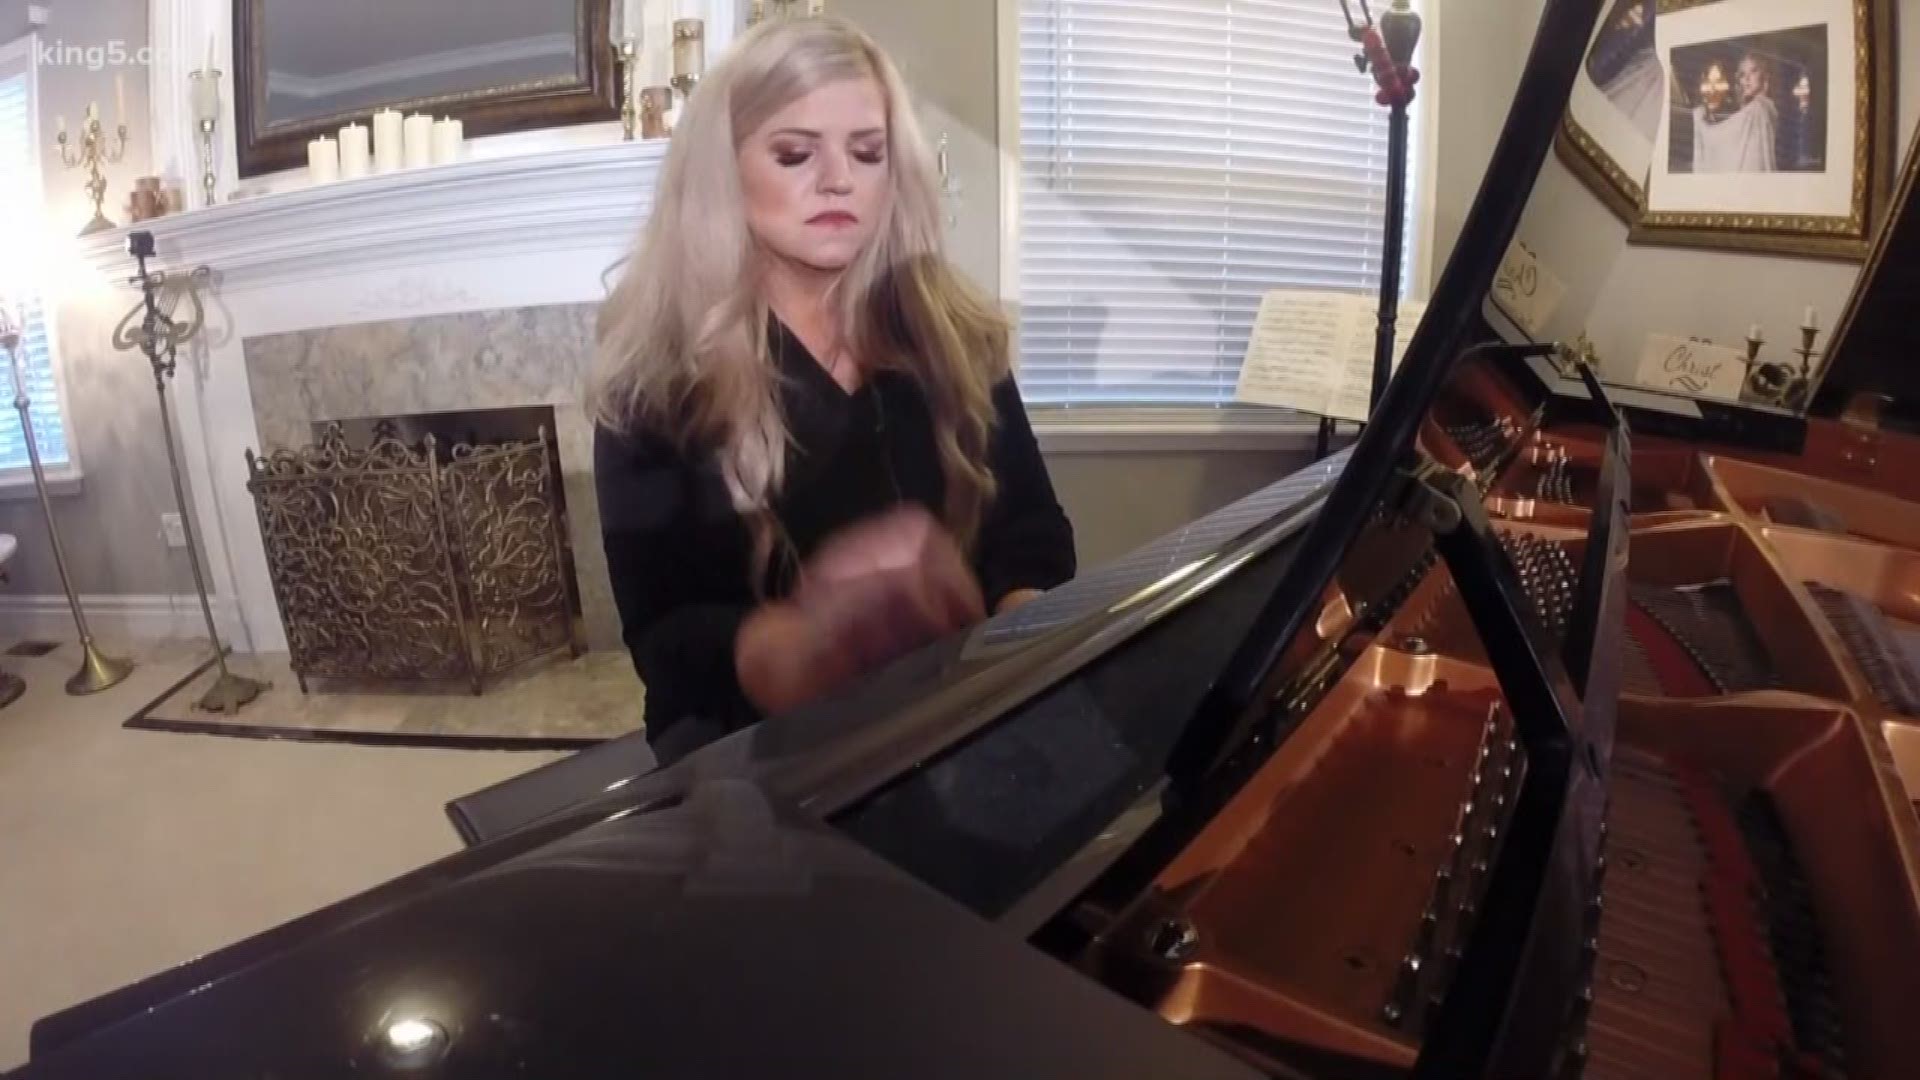 Pianist Jennifer Thomas plays her music as an outro on KING 5 at 5:00.